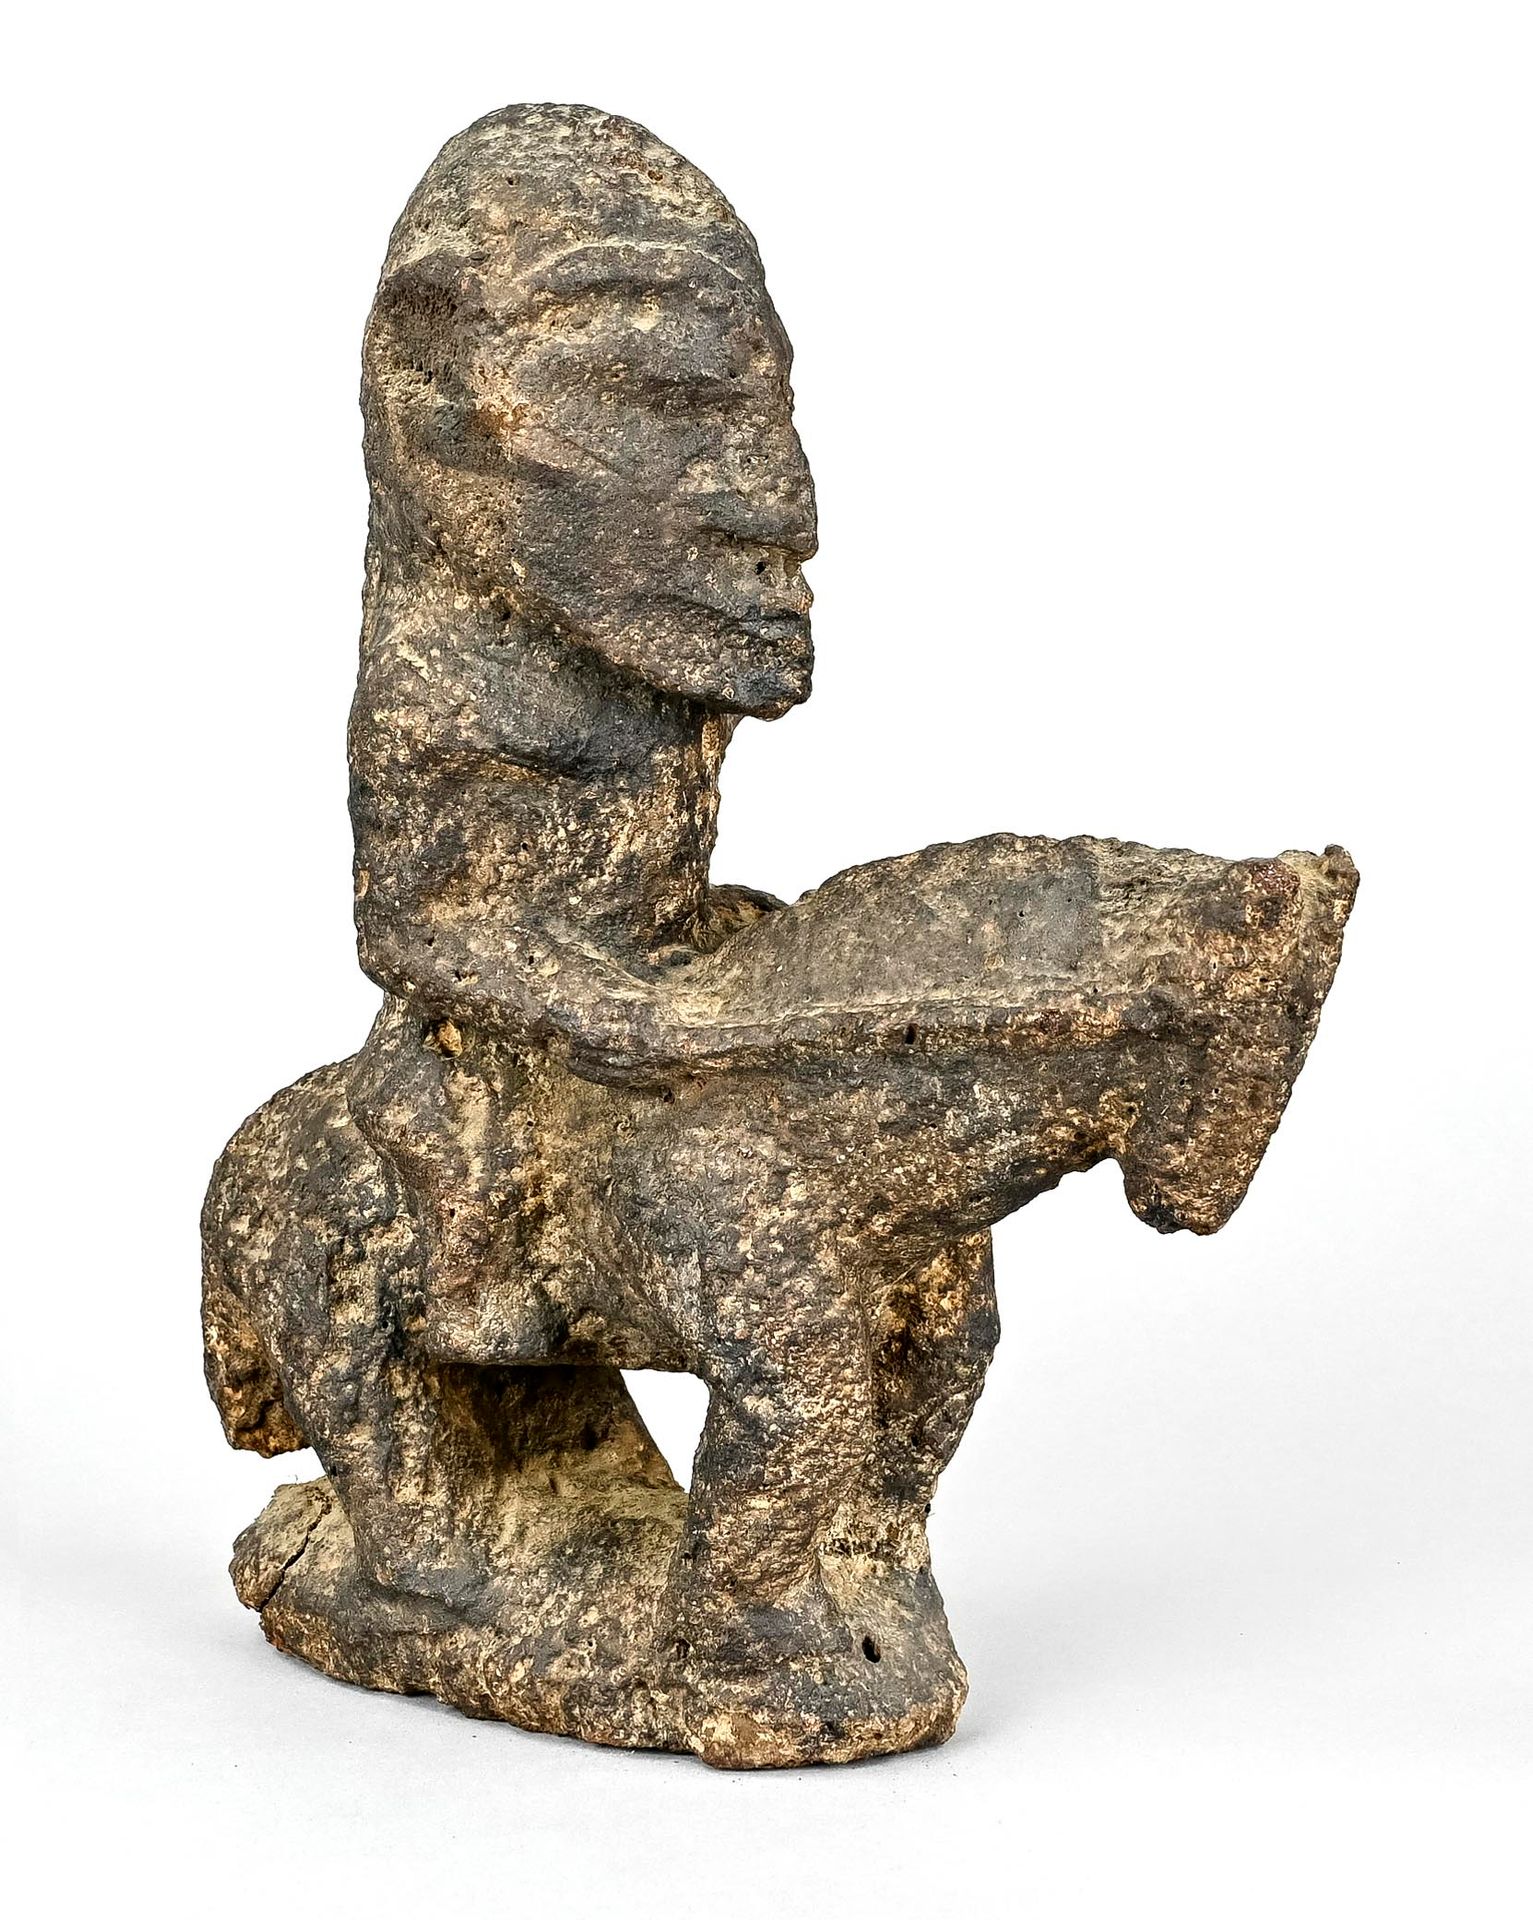 Null equestrian figure, Africa/Oceania, exceptional work, height 30 cm x 26 cm